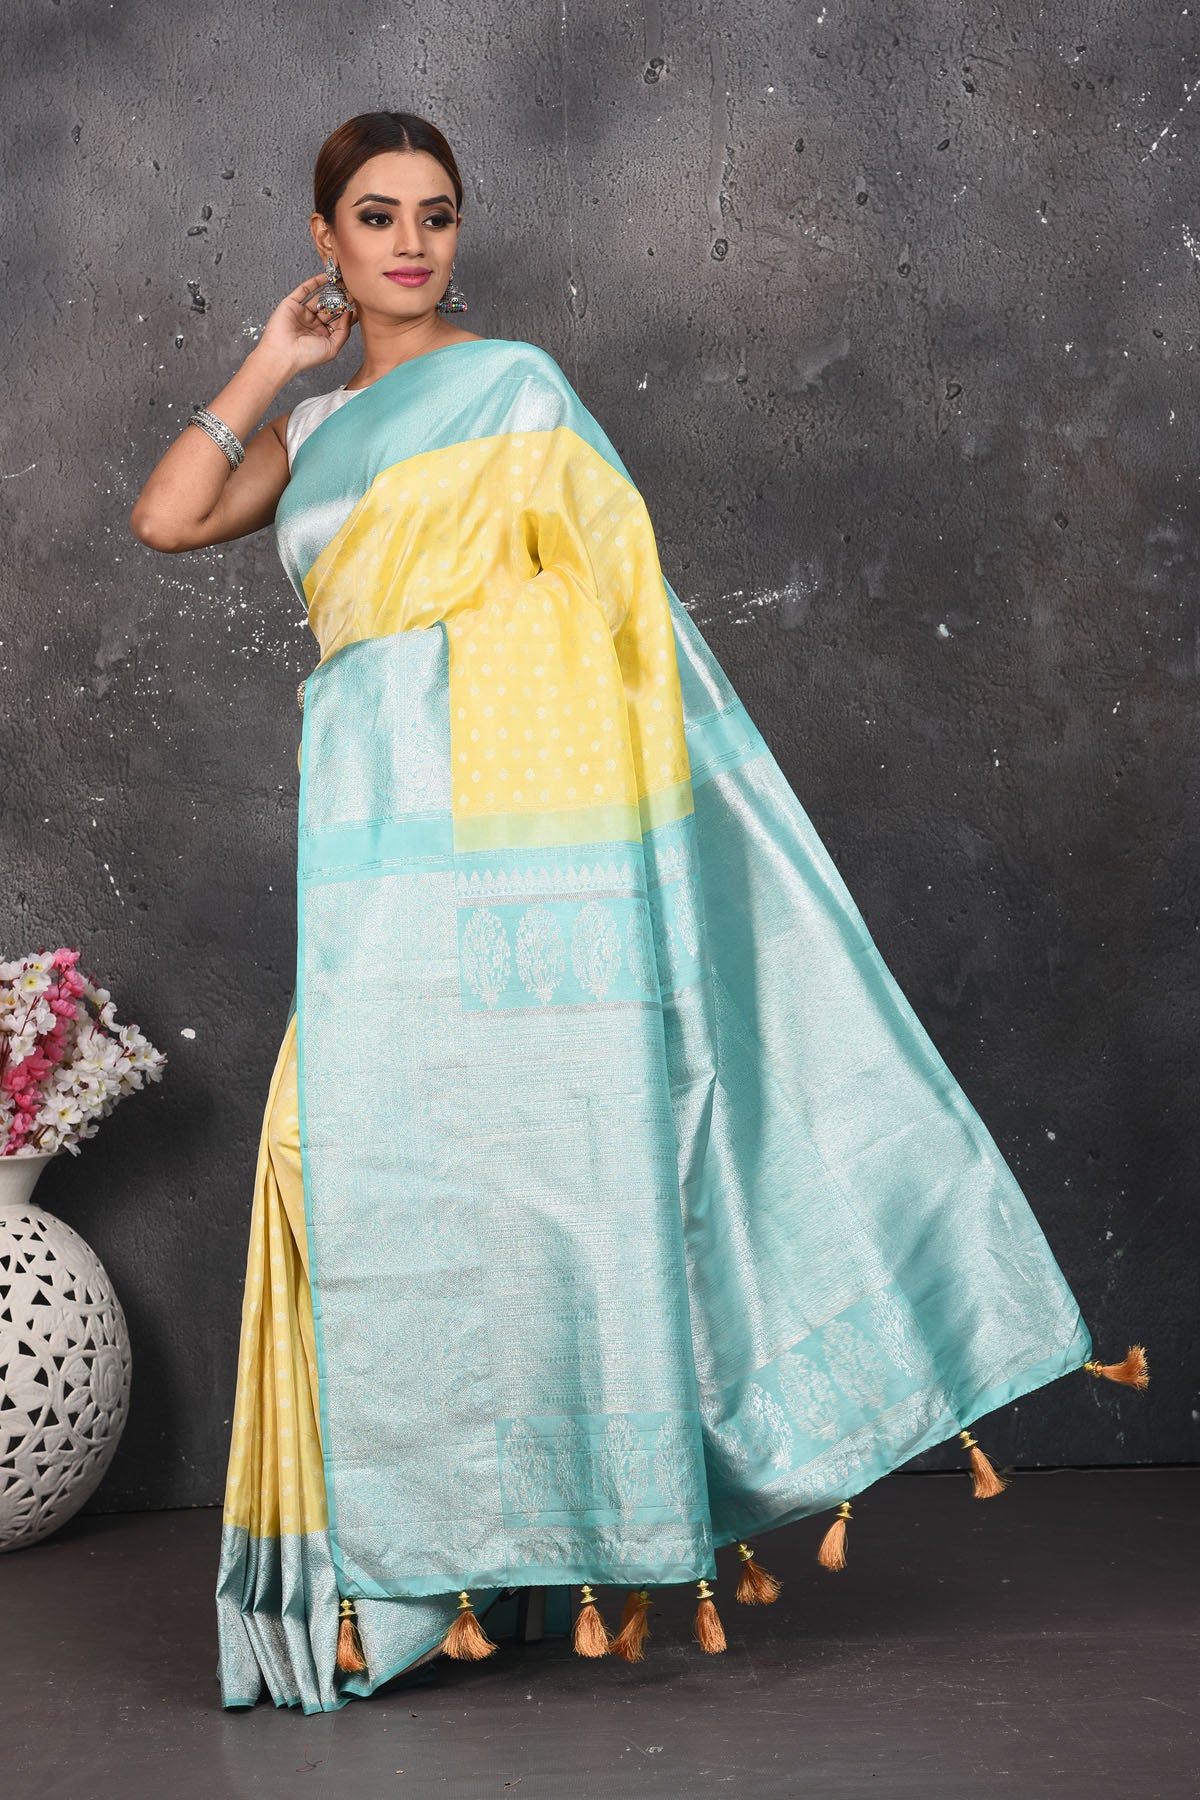 Shop this royal handwoven pure kanchiresham saree in lemon yellow with a firozi blue pallu and buti work online in USA. Presenting Enchanting Yet Breathable Organic Banarasi Saree Made from Kanjivaram silk. Drape yourself in this beautiful banarasi saree from Pure Elegance Indian Fashion Store in USA with Zari woven Border with a potli bag and high heels for a flawless look.- Full view with open pallu.